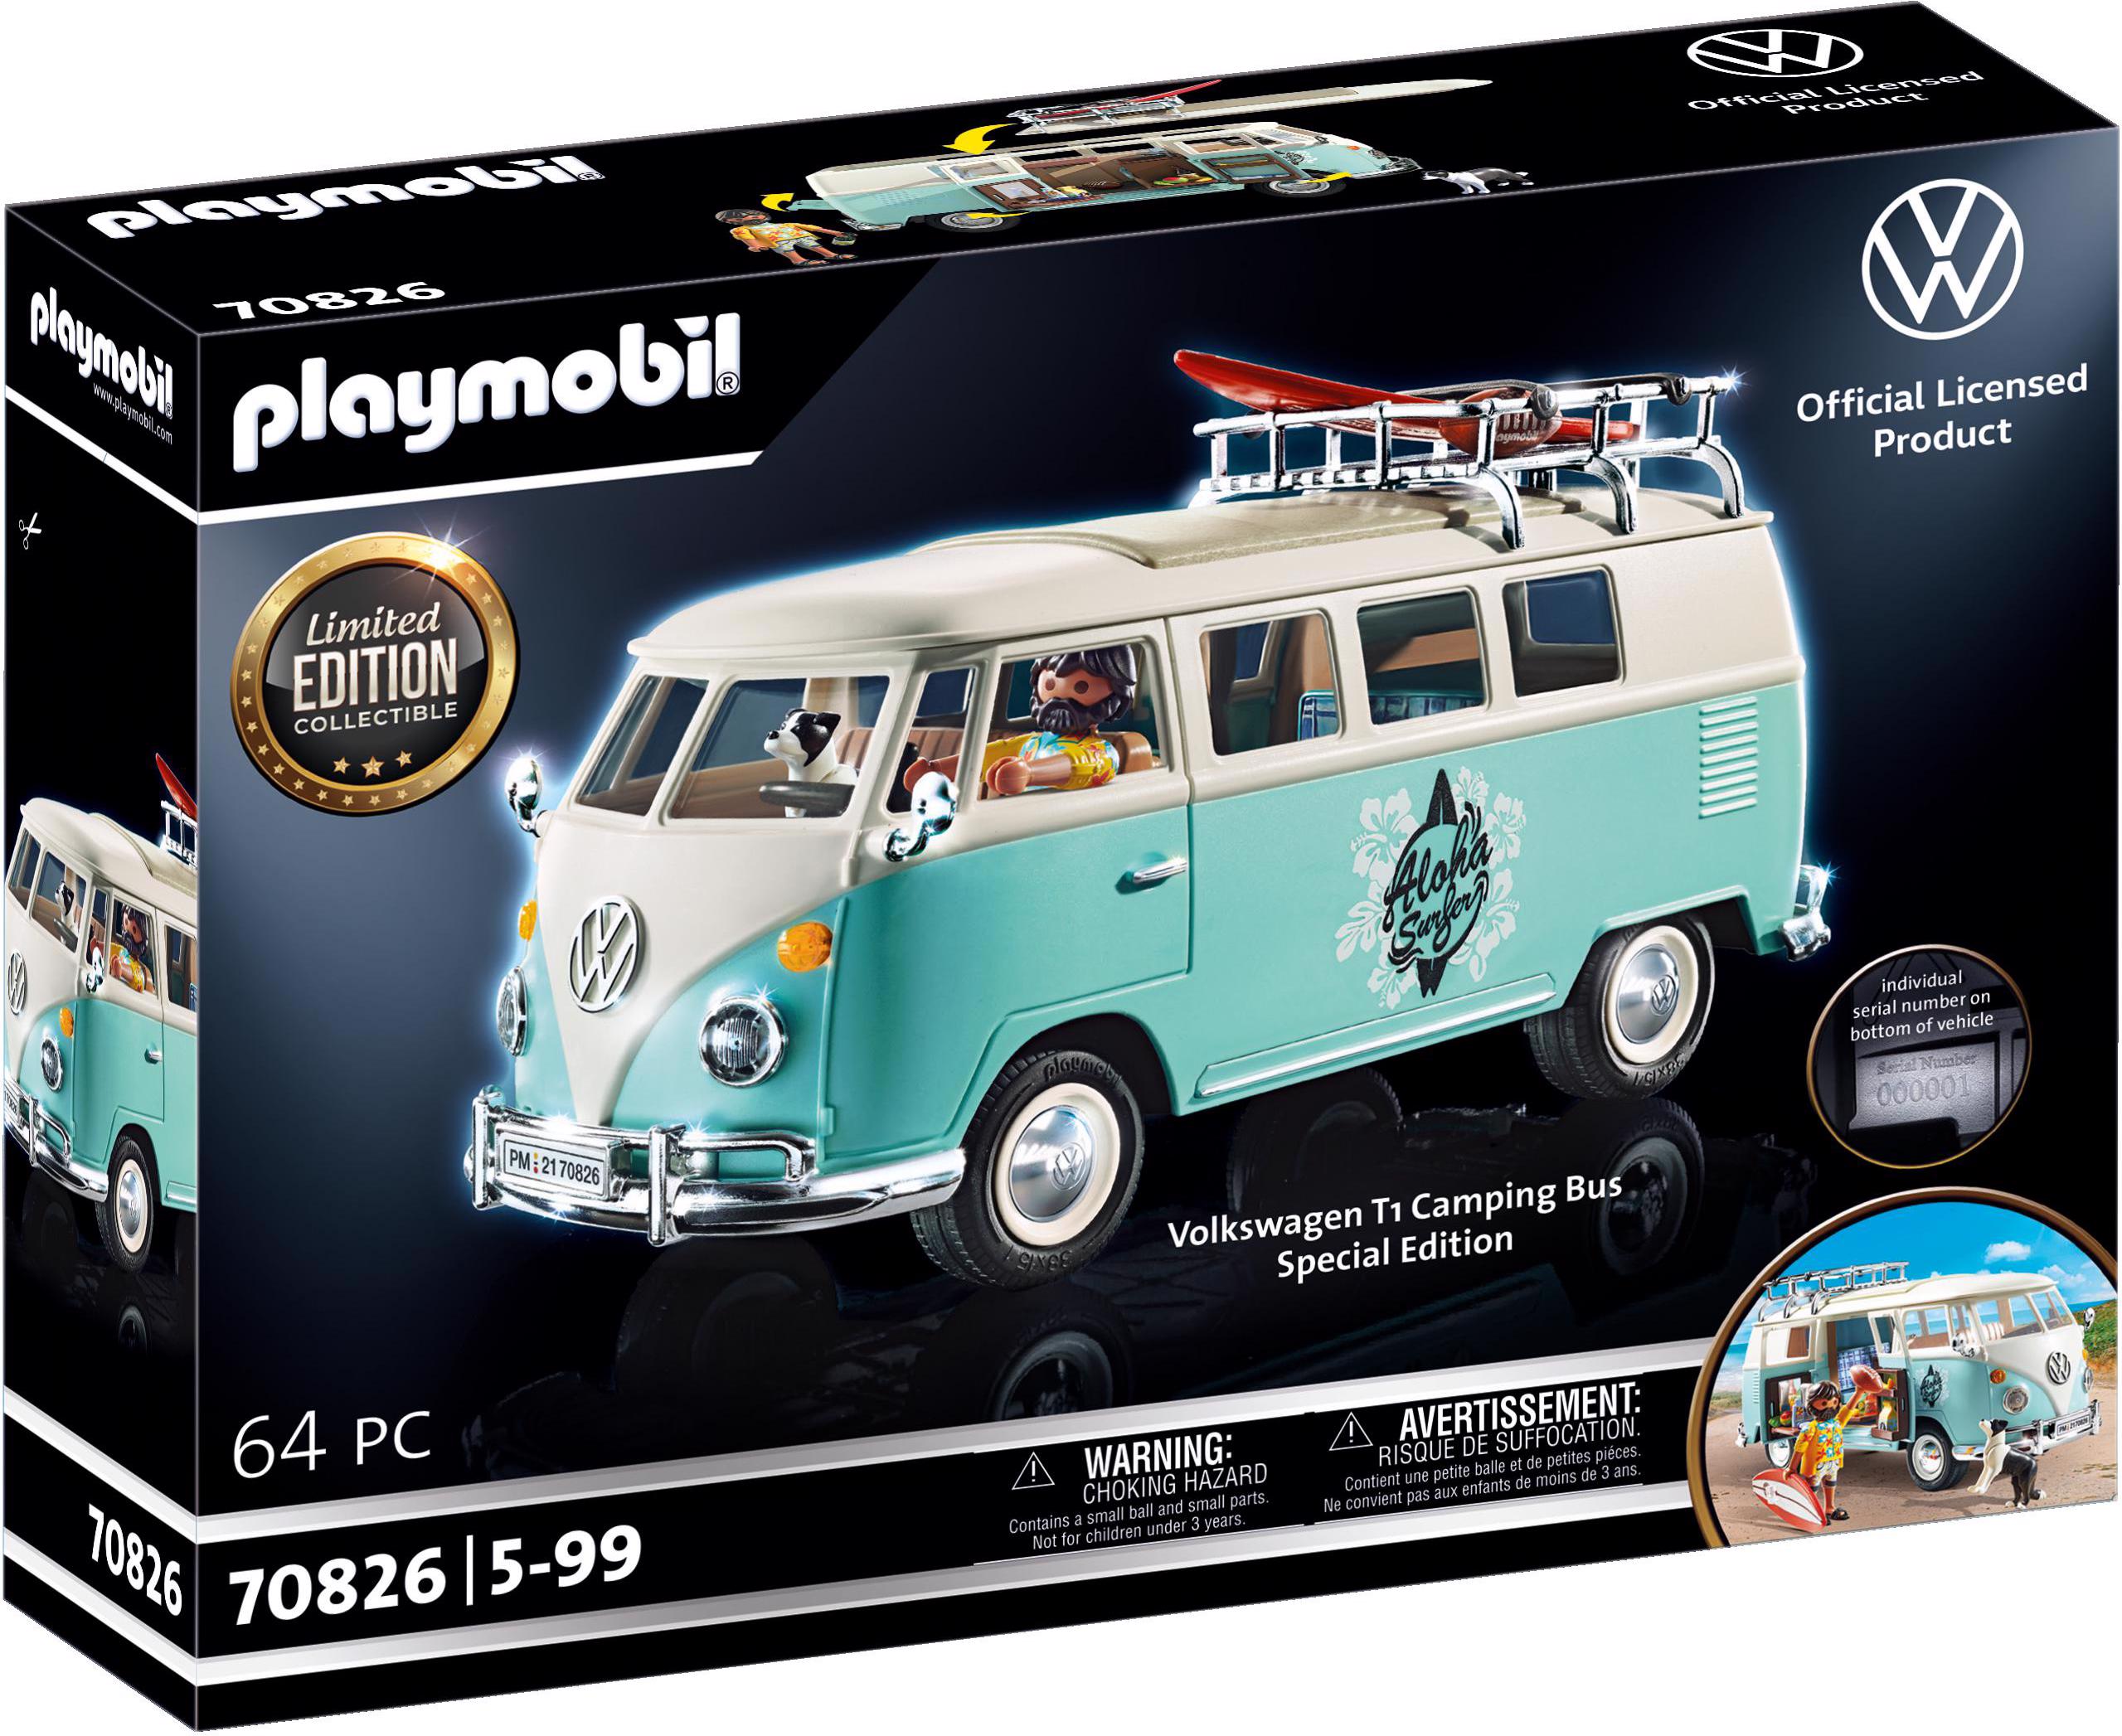 Playmobil Volkswagen T1 Camping Bus Special Edition Galaxus